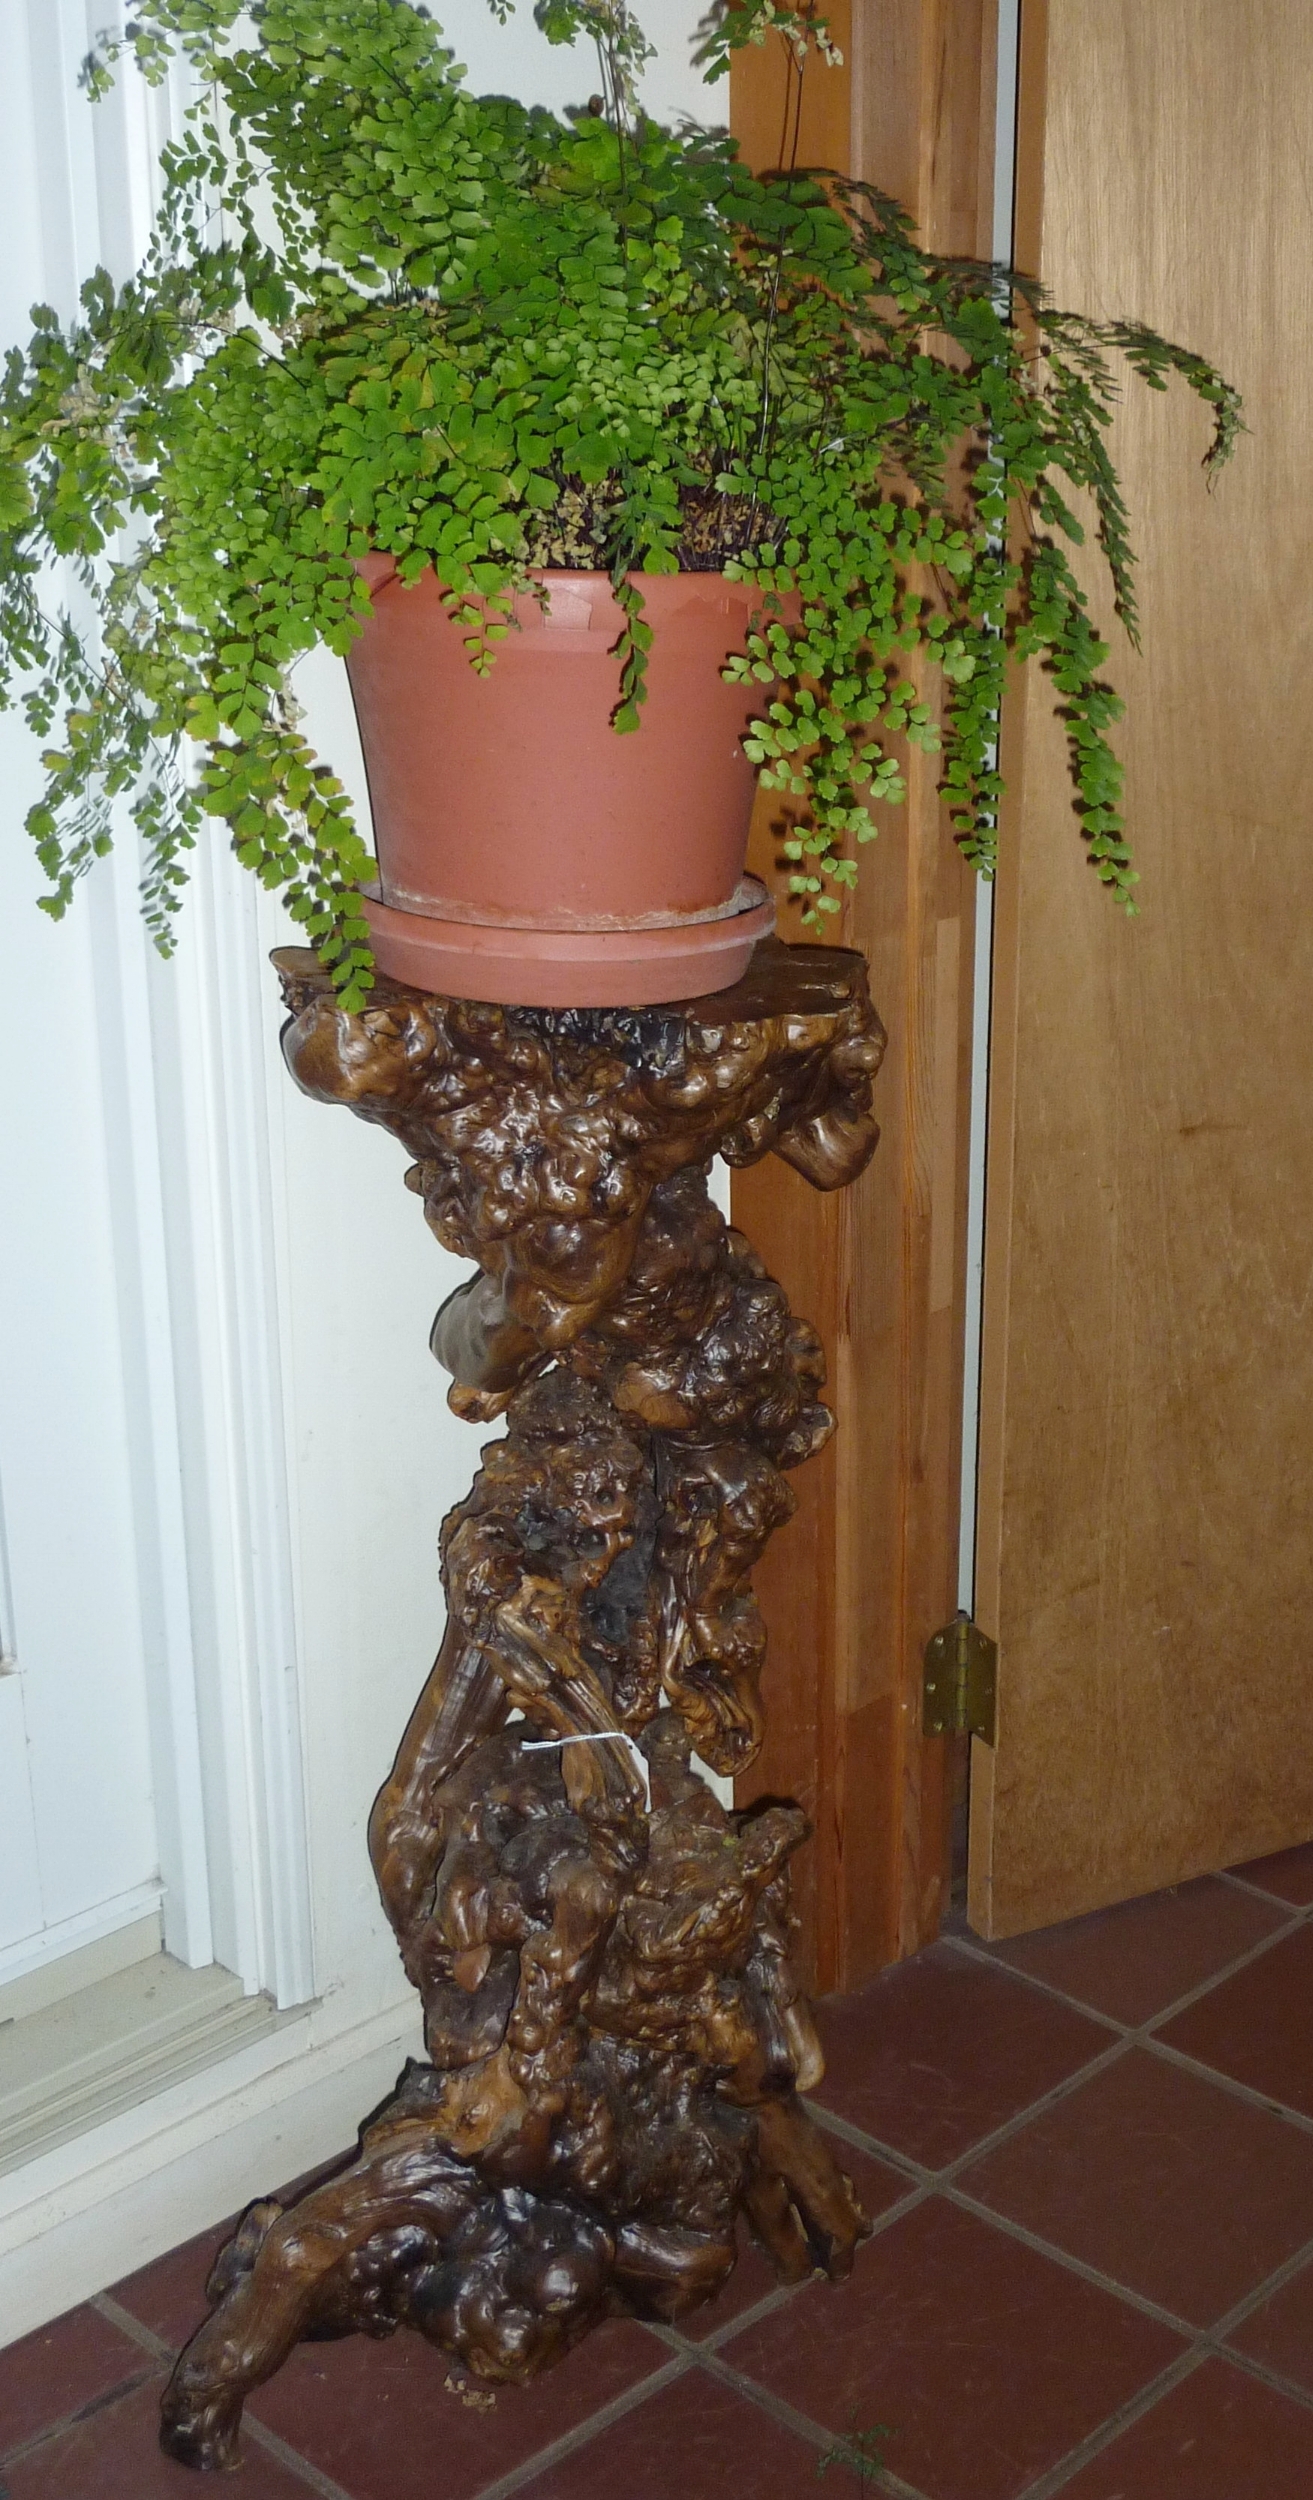 Wood burl root plant stand, China, mid 20th century.